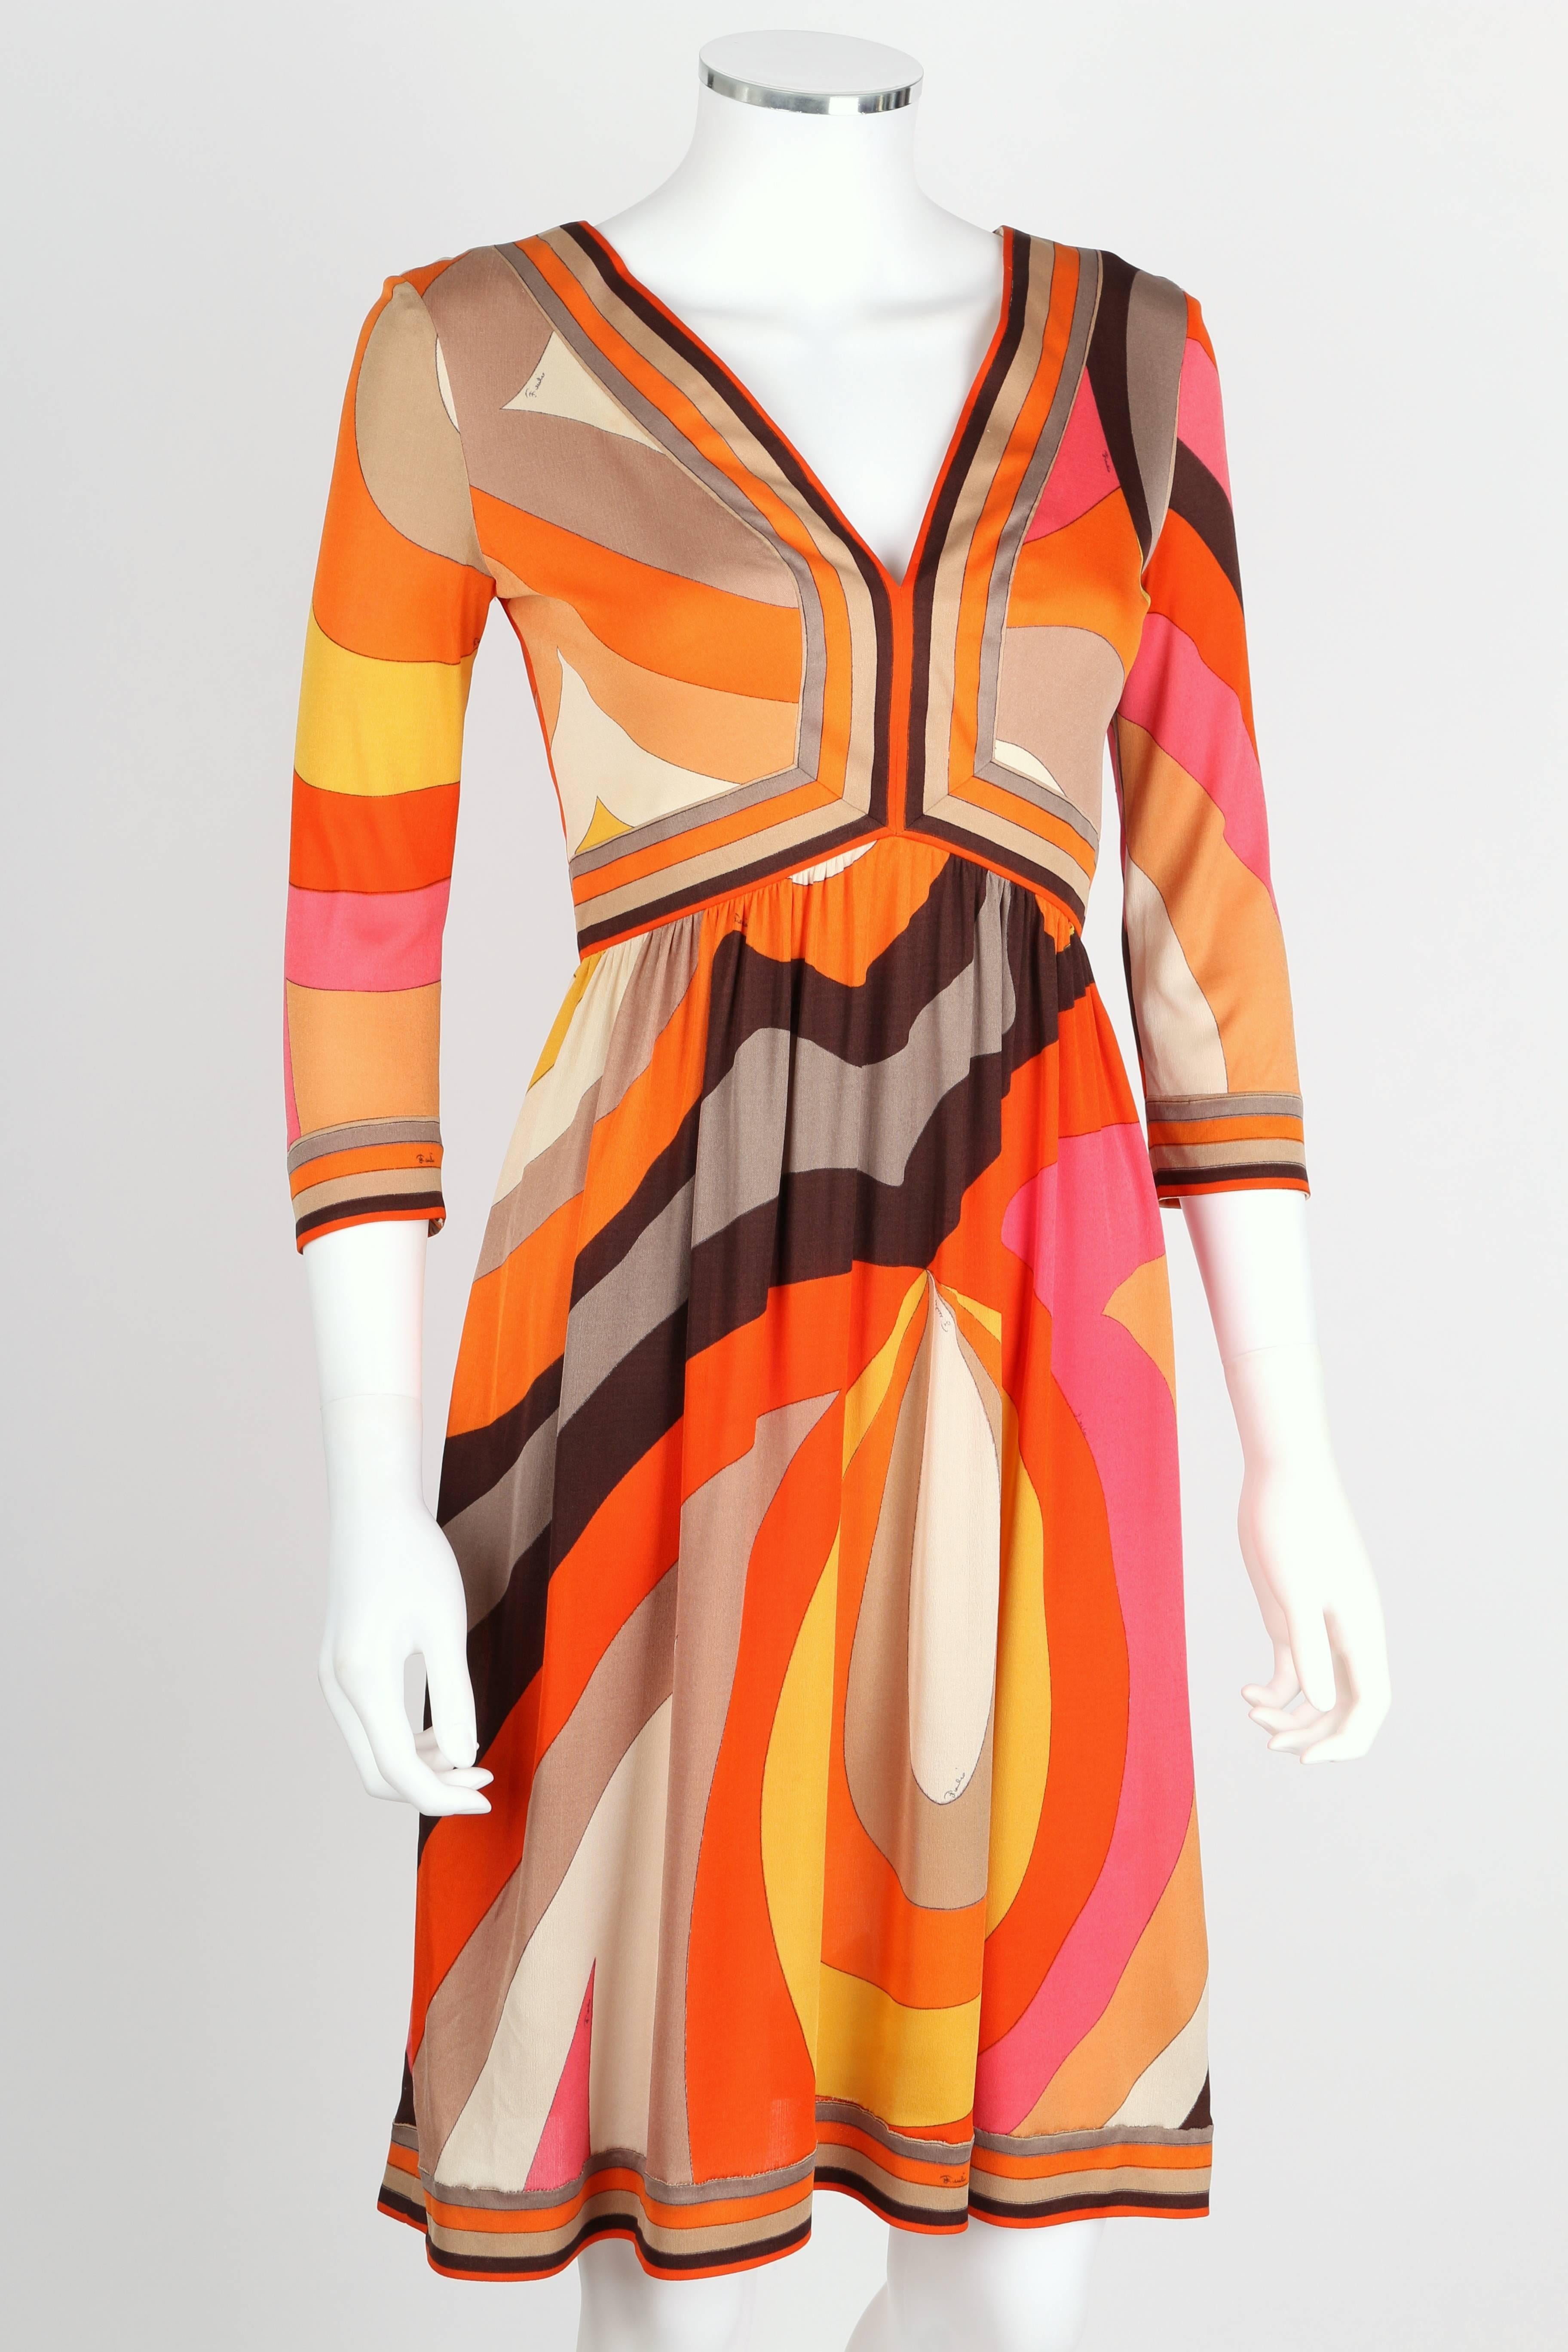 Vintage c.1960s Emilio Pucci orange, pink, brown, gold, and ivory abstract signature print silk jersey dress. Empire waist. V-neckline at front. Three-quarter length sleeves. Above the knee length. Center back zipper closure. Marked Fabric Content: